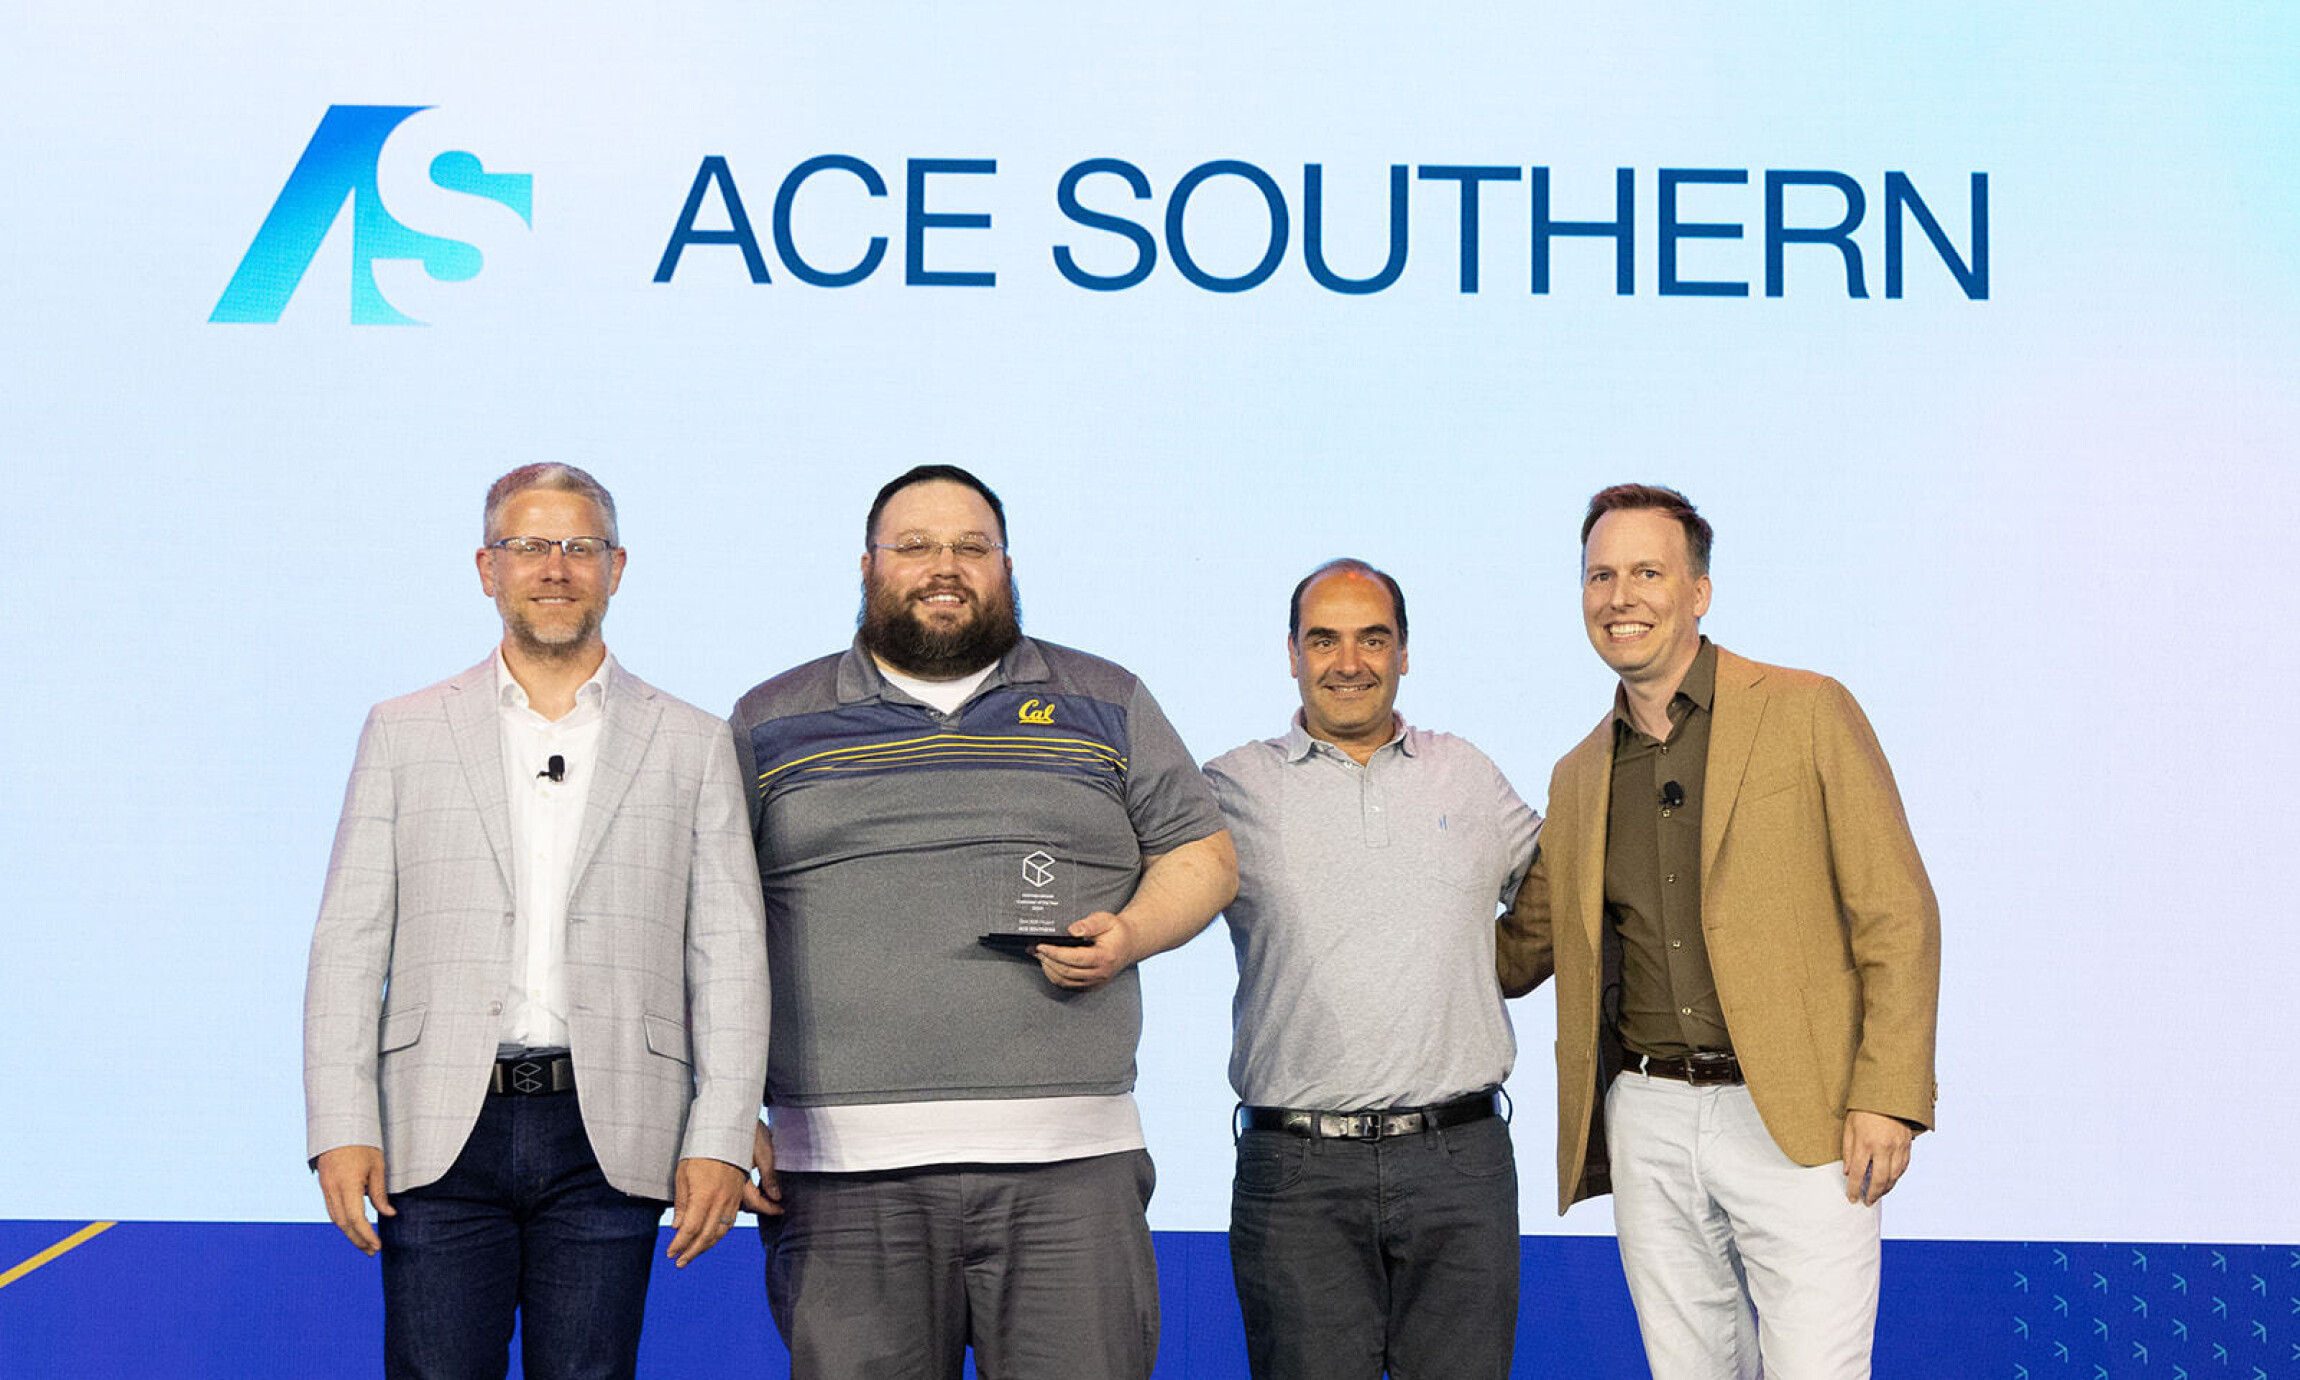 Best B2B Project: ACE SOUTHERN